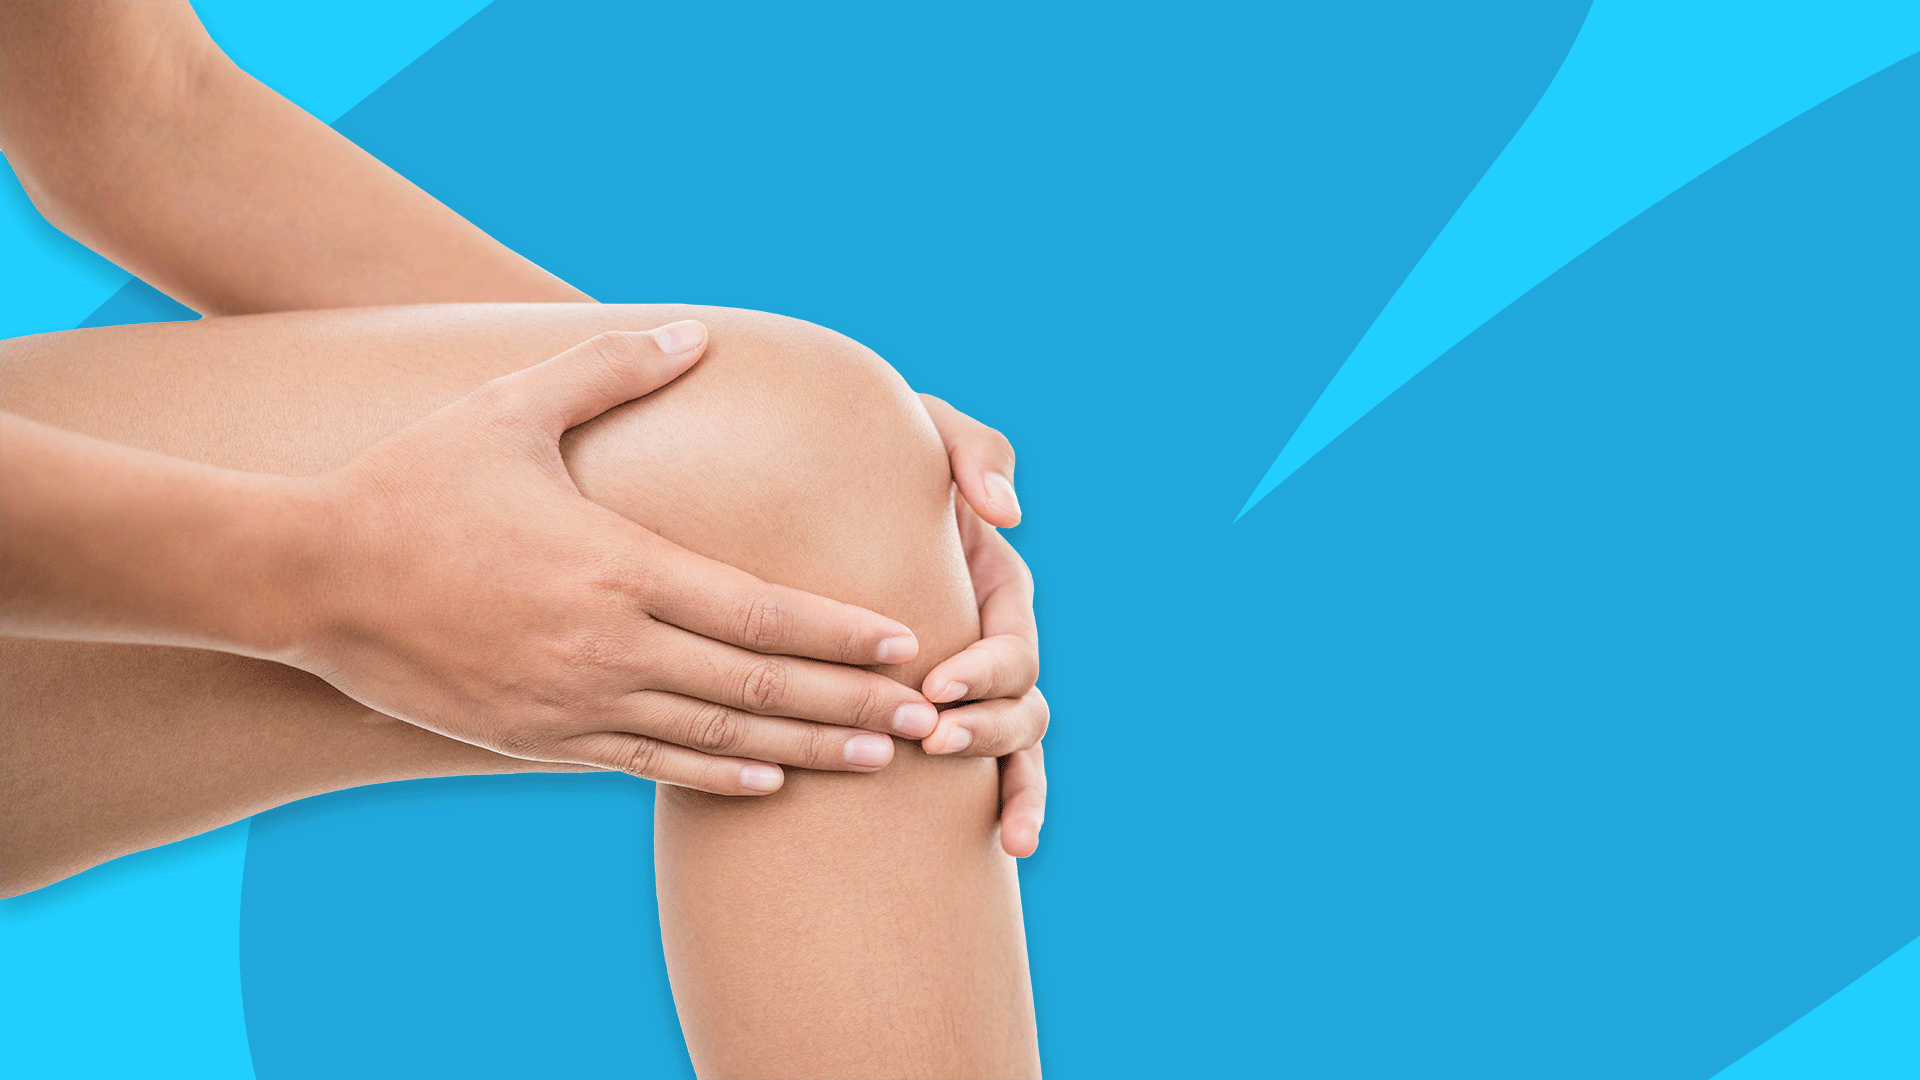 What causes leg cramps? Related conditions and treatments